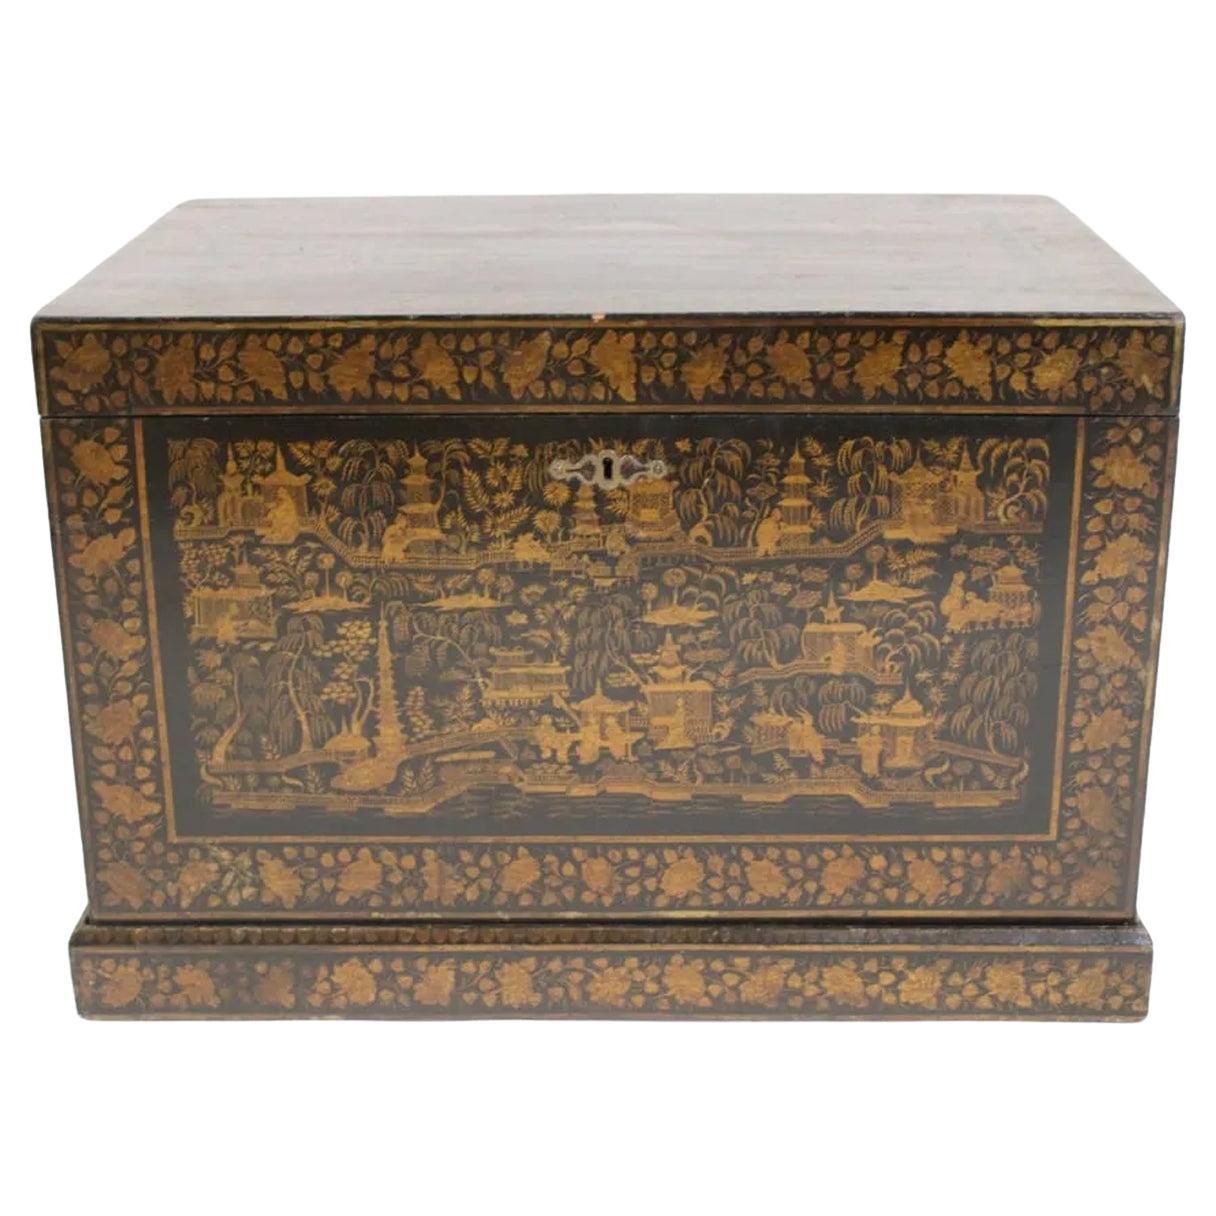 Chinese Export Gold Decorated Black Lacquer Storage Box on Plinth Base For Sale